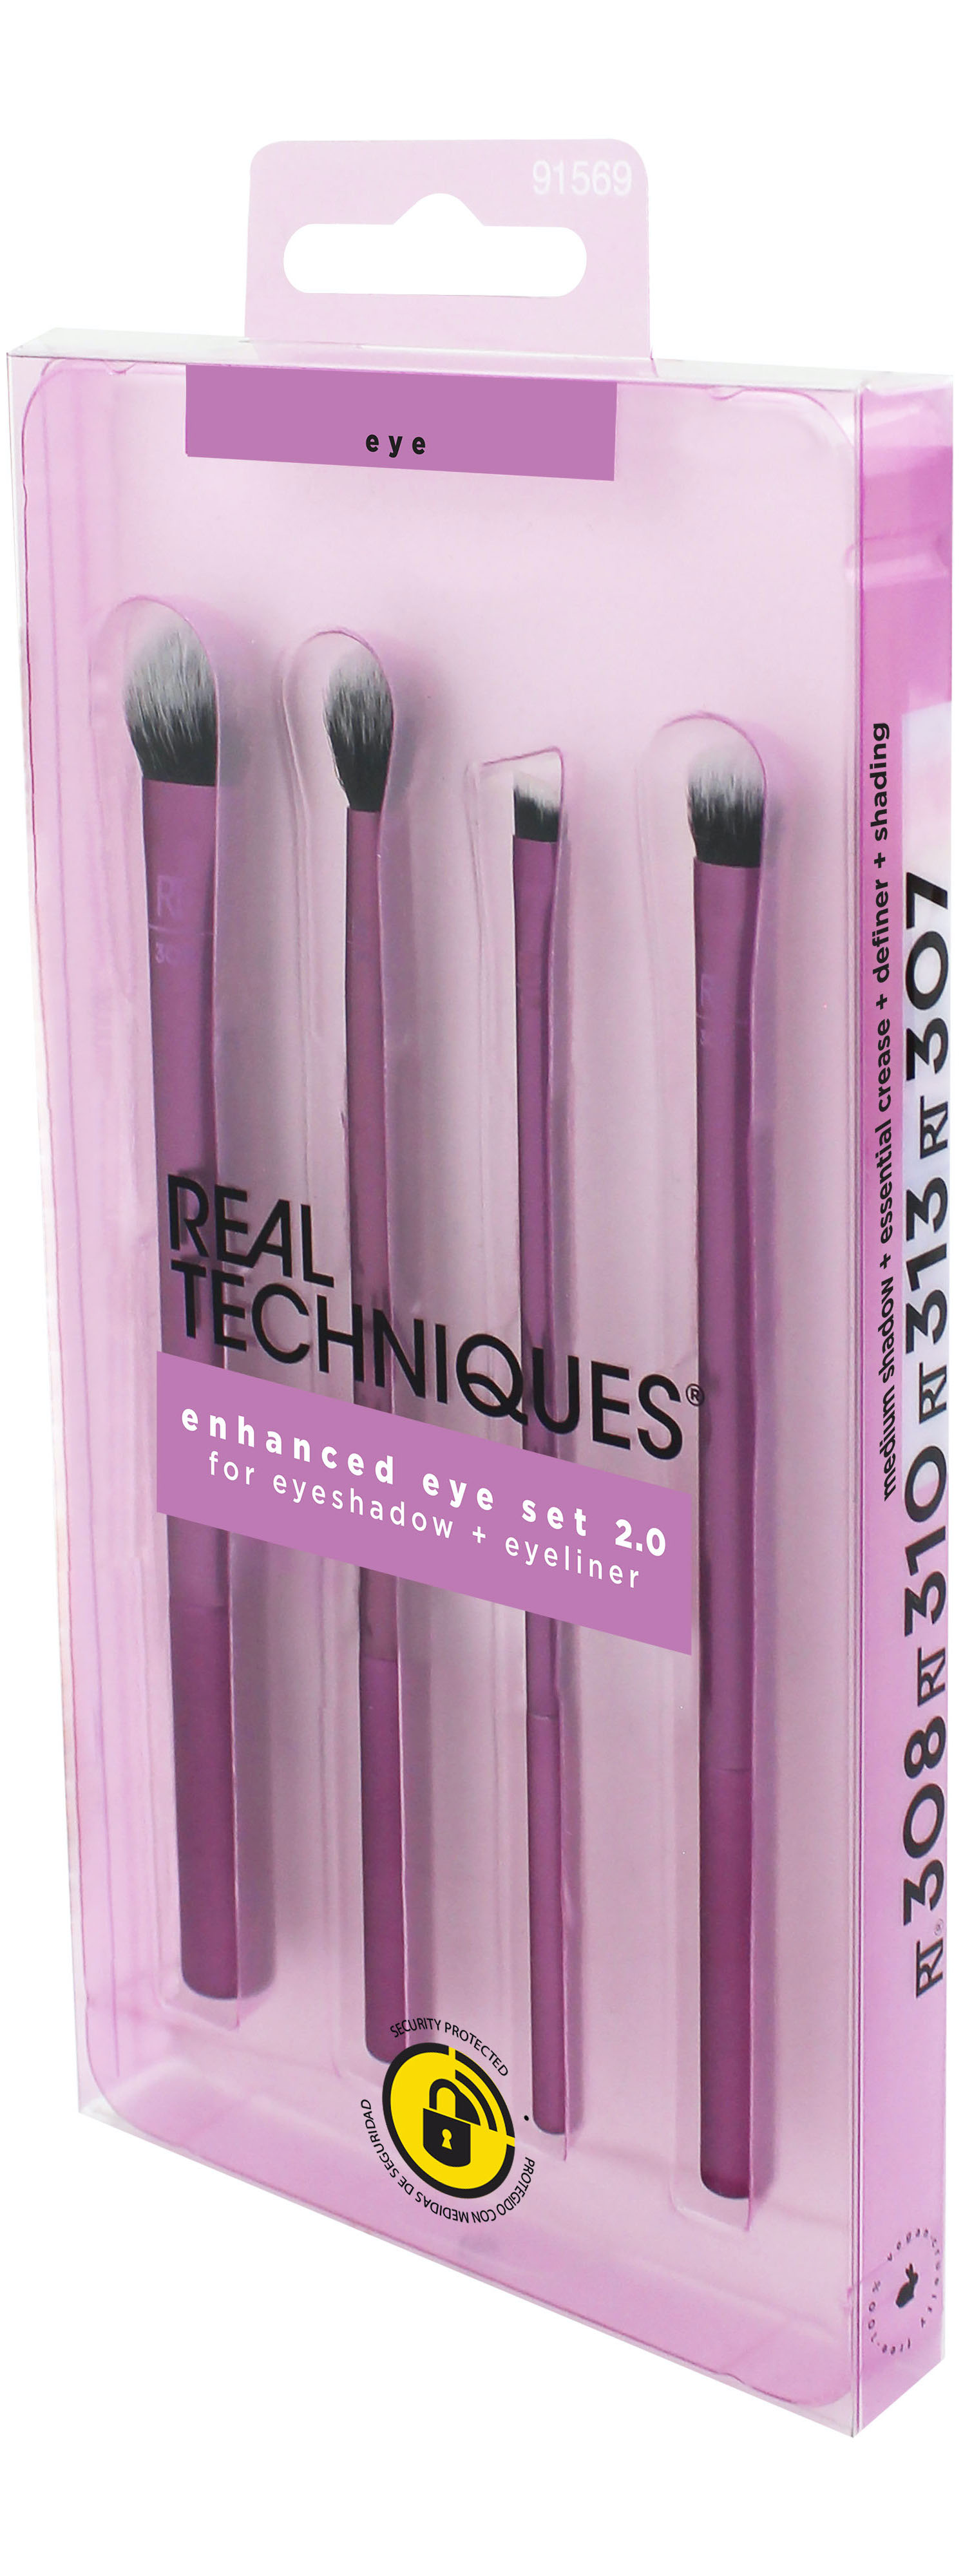 Real Techniques Enhanced Eye Makeup Brush Set, 4 Pieces - image 4 of 6